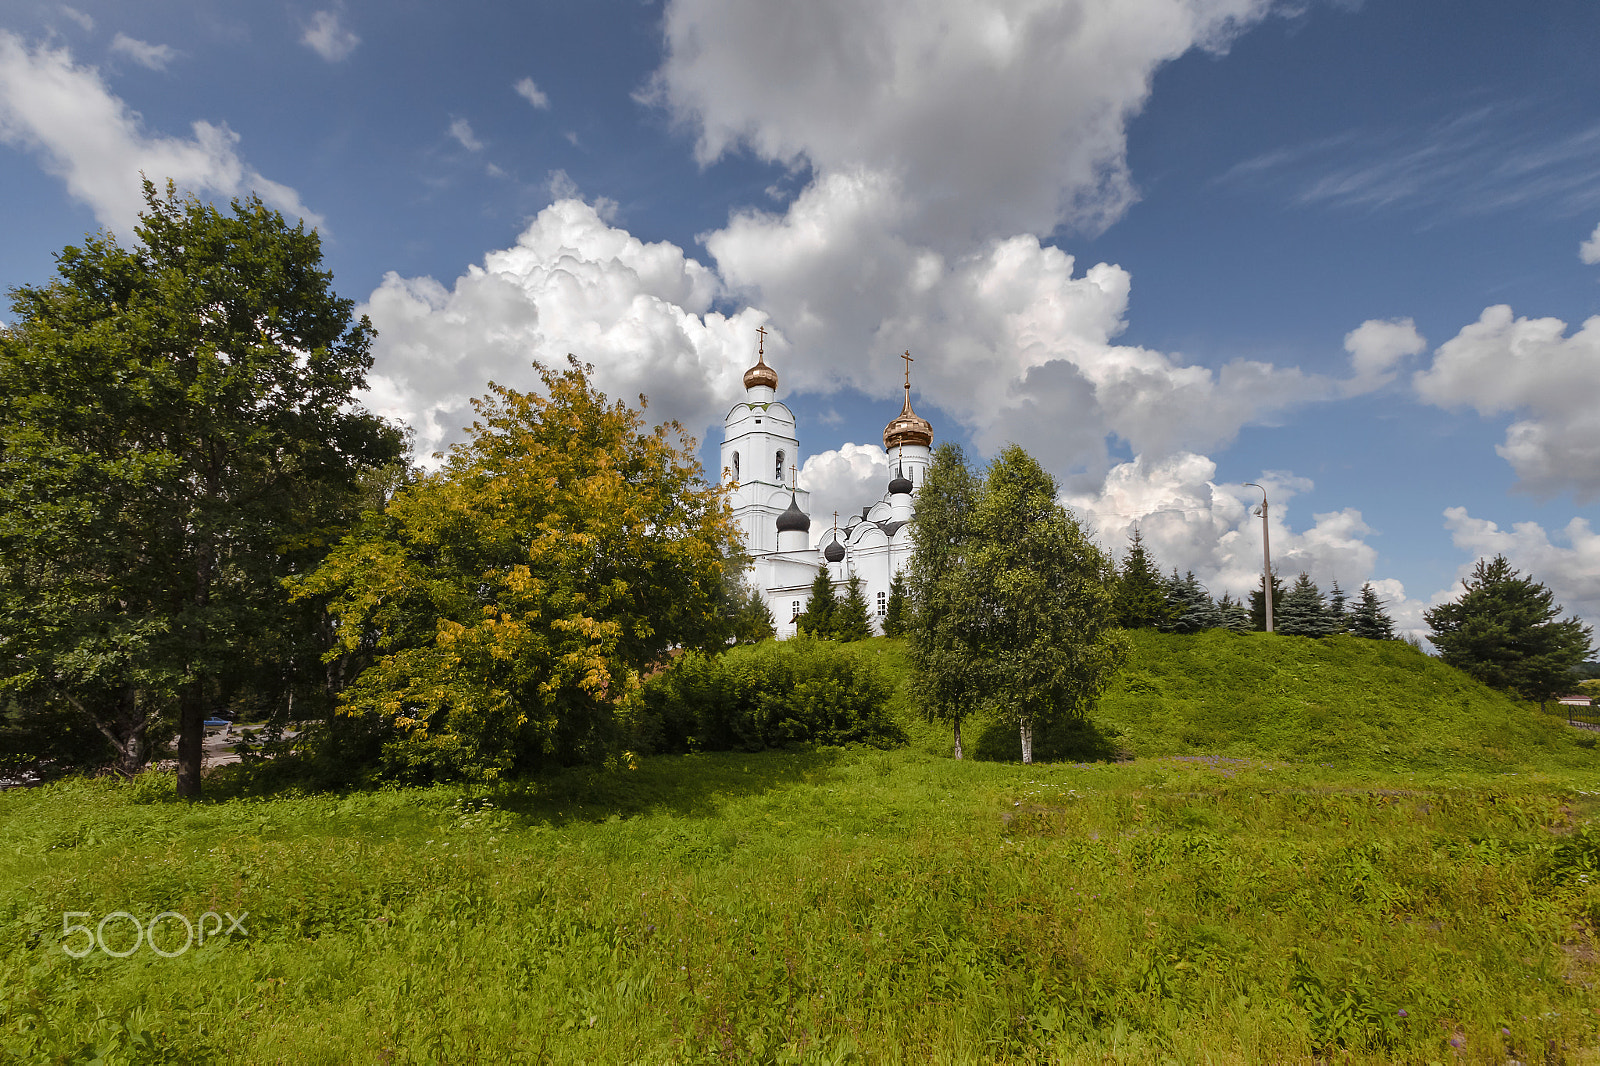 Nikon D7000 sample photo. Old church in vyazma, russia photography